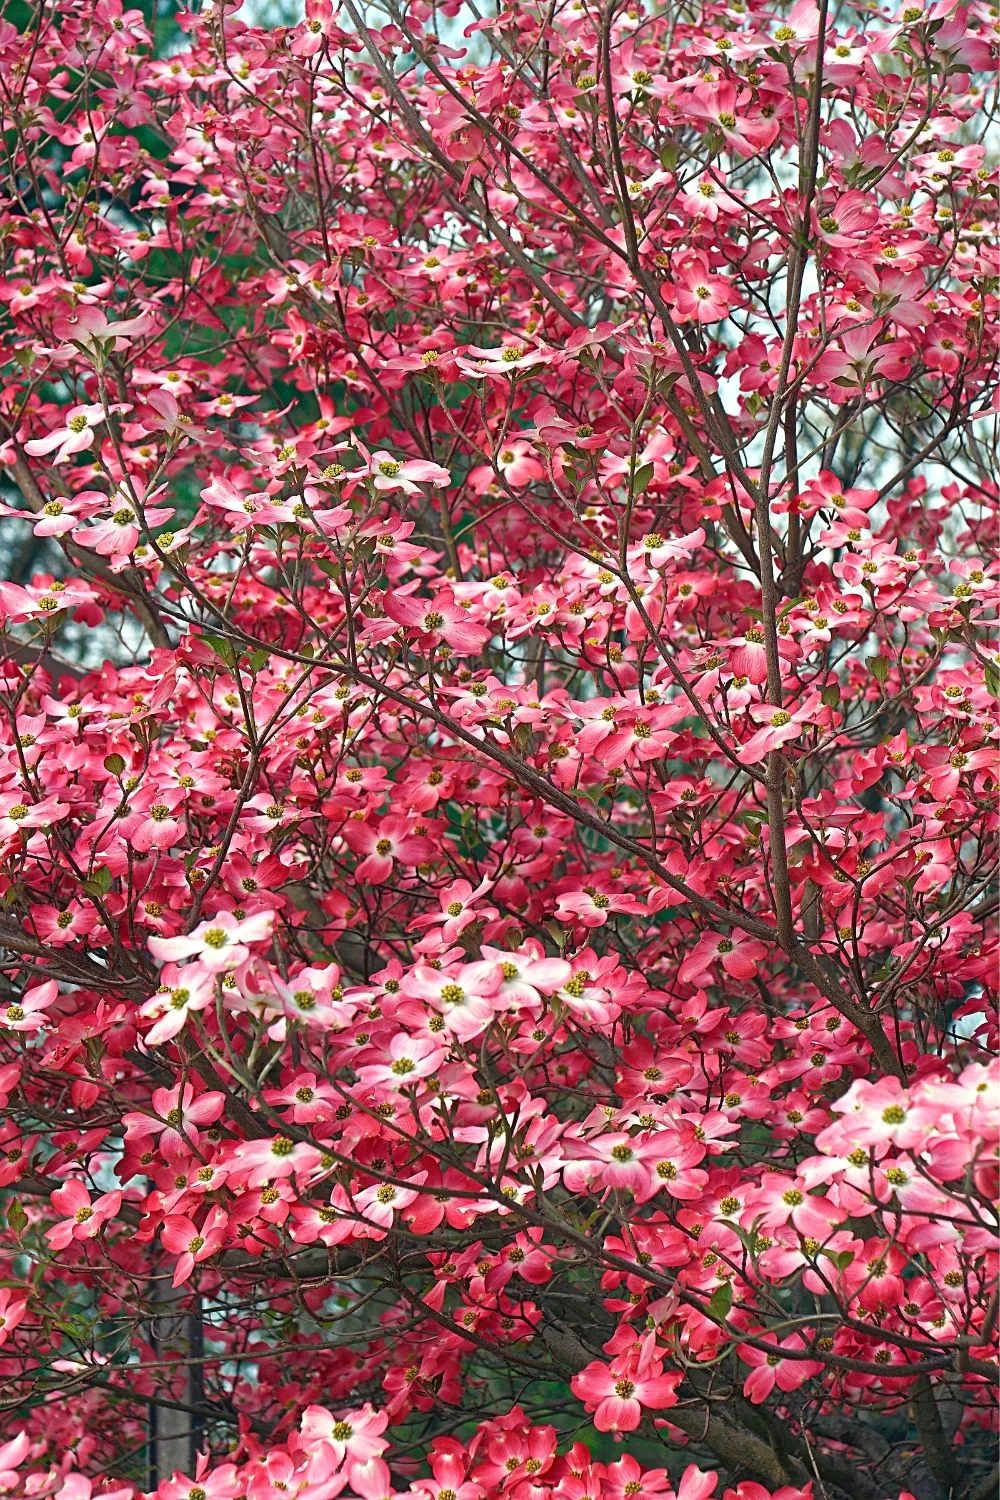 Flowering Dogwood produces small pink flowers that attract birds on your north-facing balconies